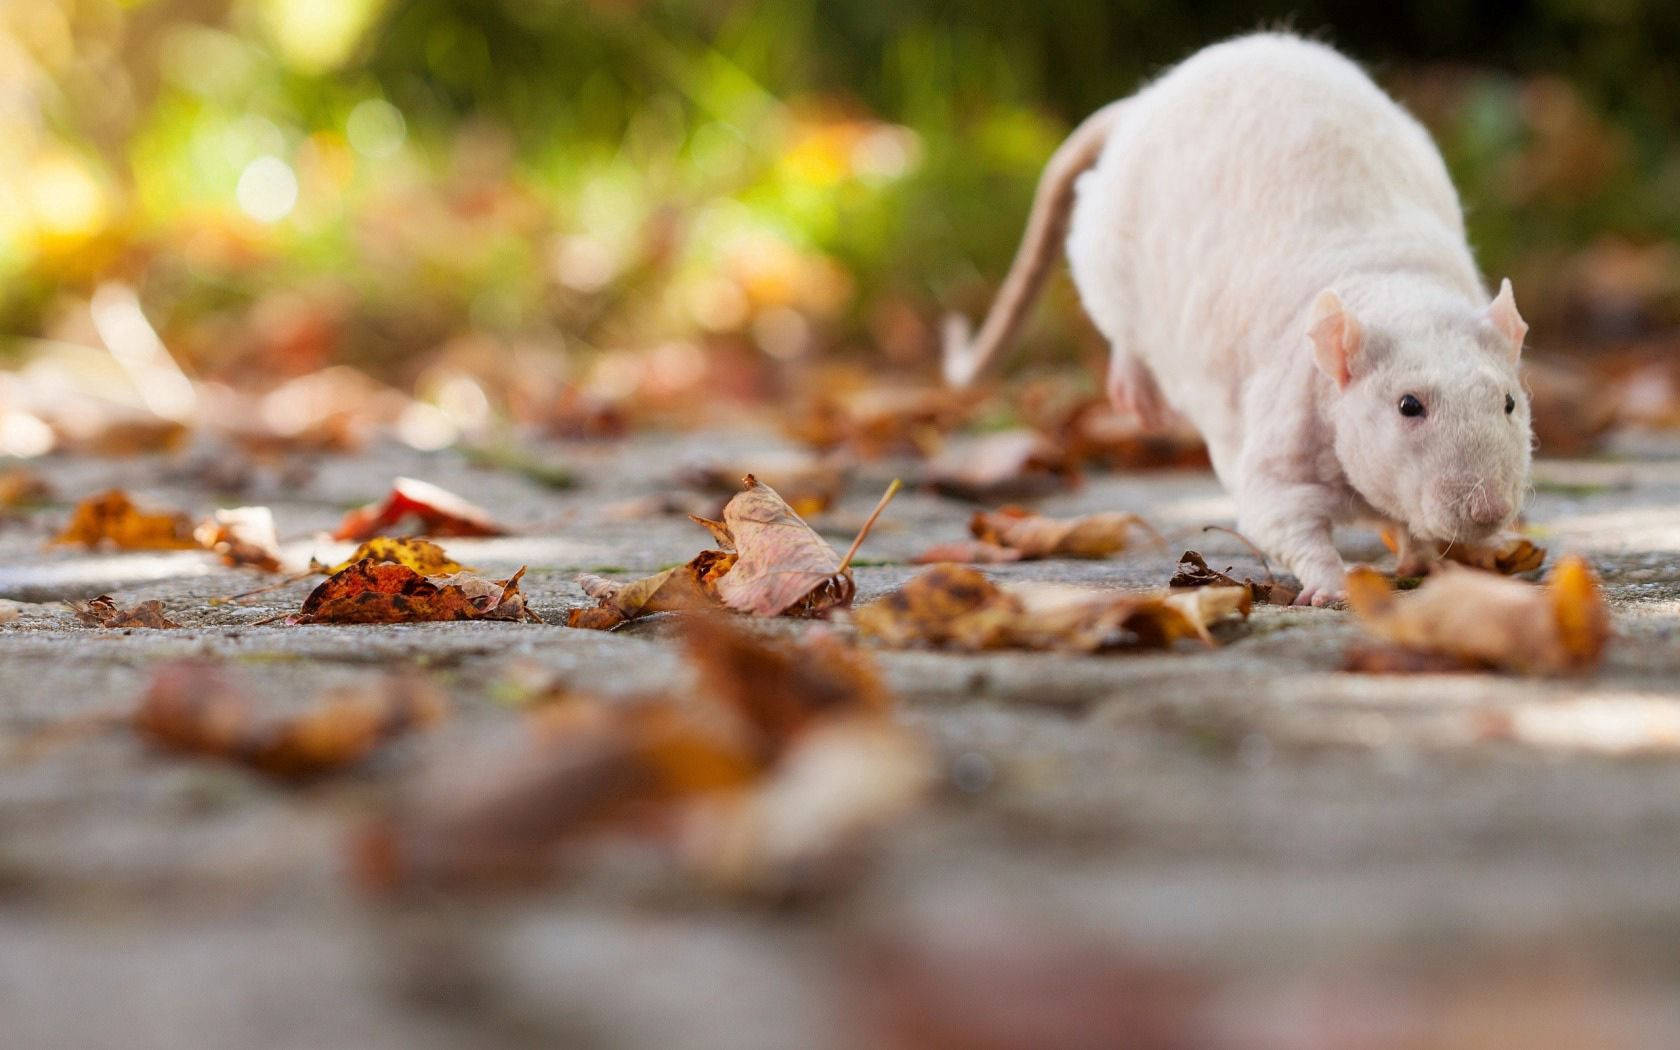 White Rat Playing With Fallen Leaves